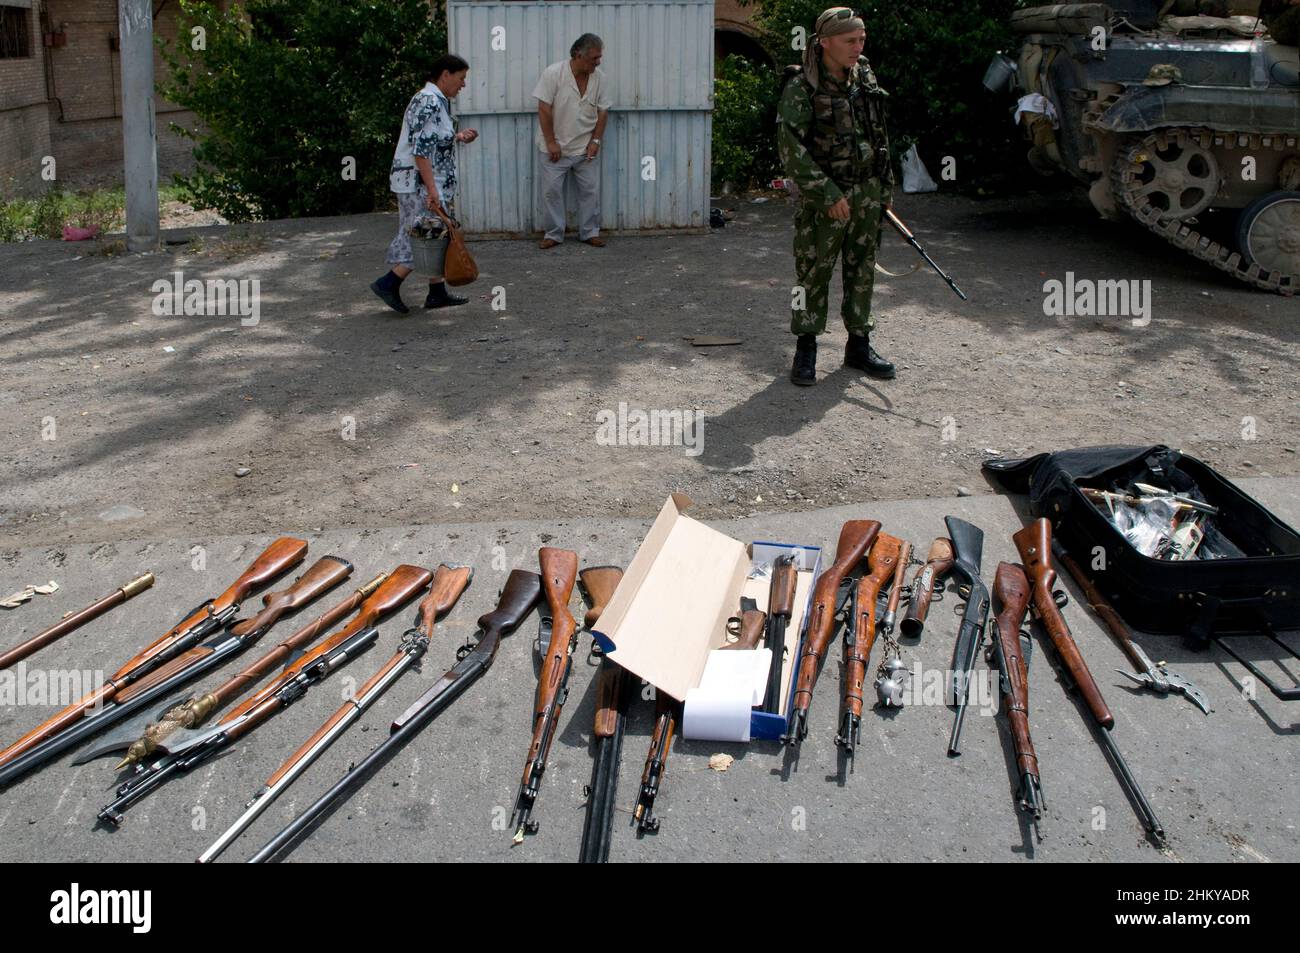 Russian military display hunting rifles seized from Georgian civilians in the city of Gori, soon after Russian forces entered the city during the Russo-Georgian War August 2008 Stock Photo